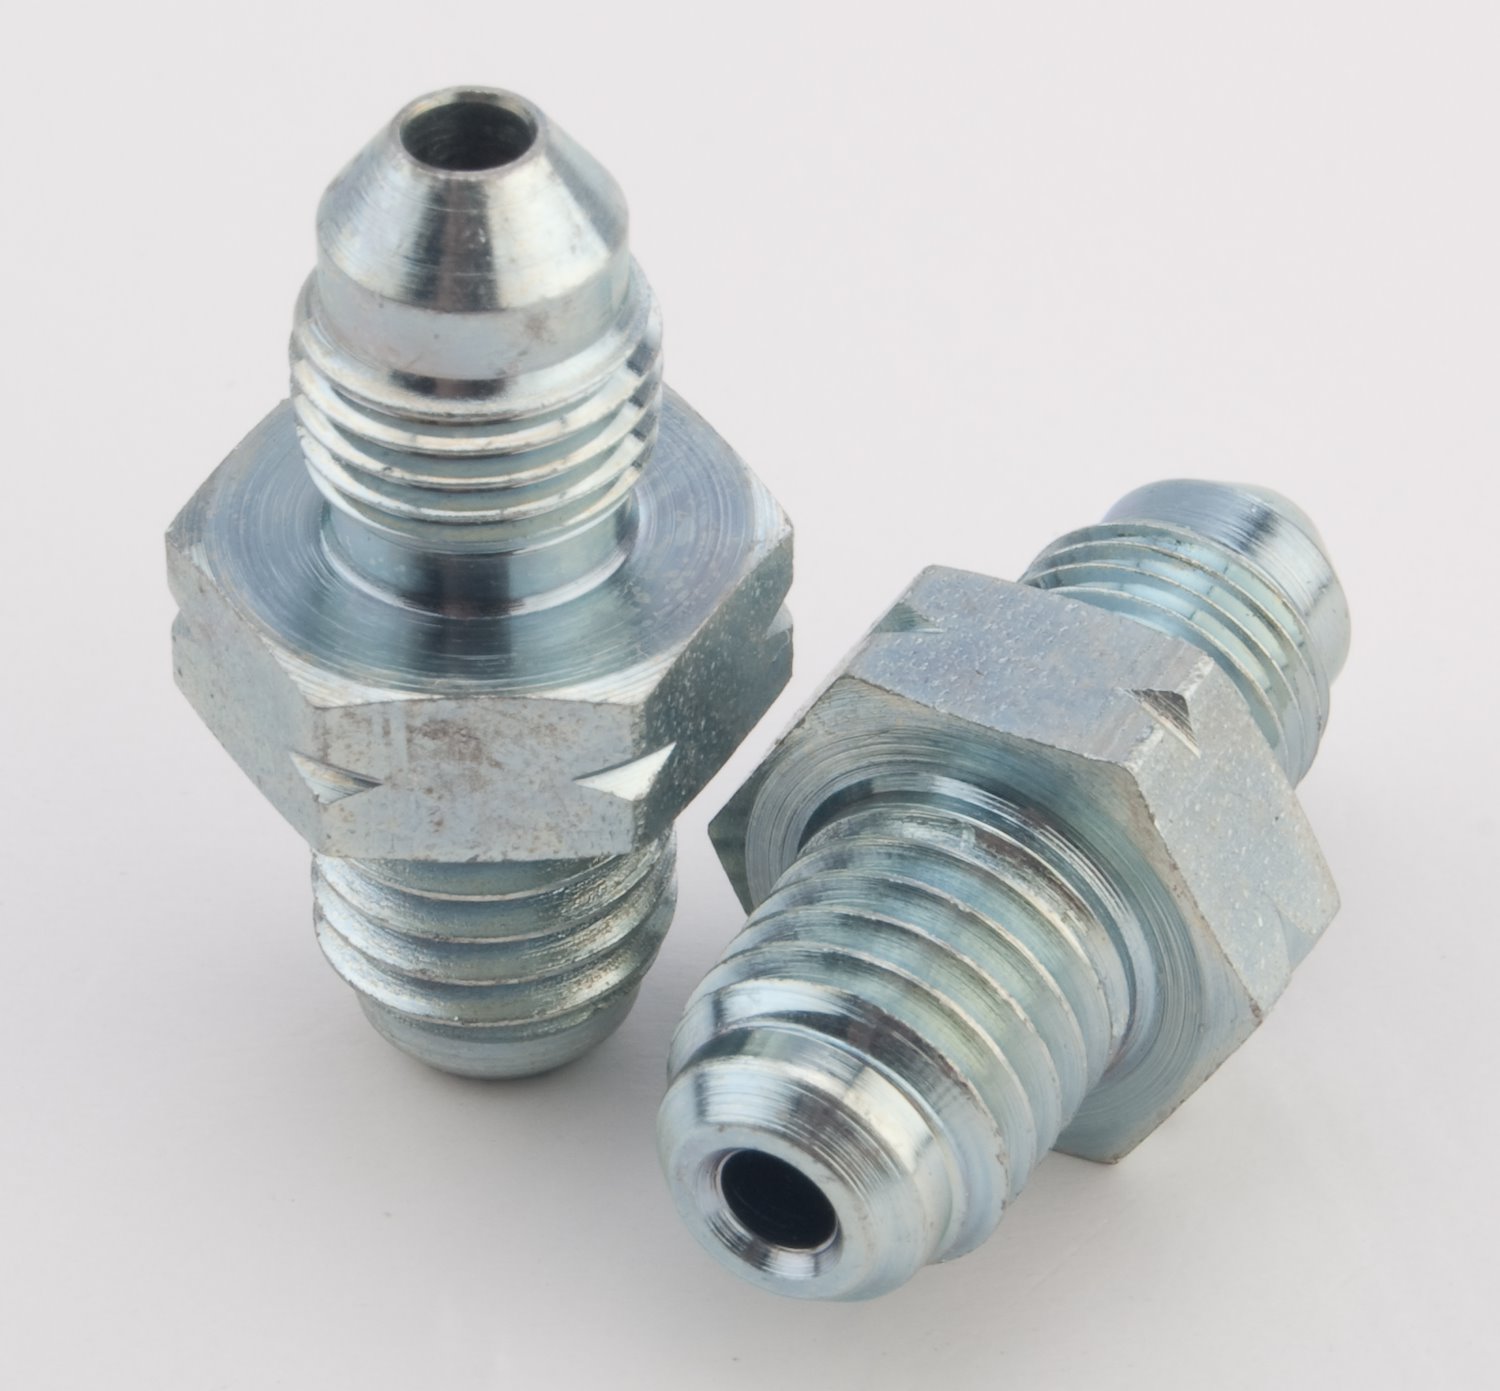 AN to Bubble Flare Male Caliper Fittings [-3 AN Male to 10 mm x 1.5 Male Bubble Flare]